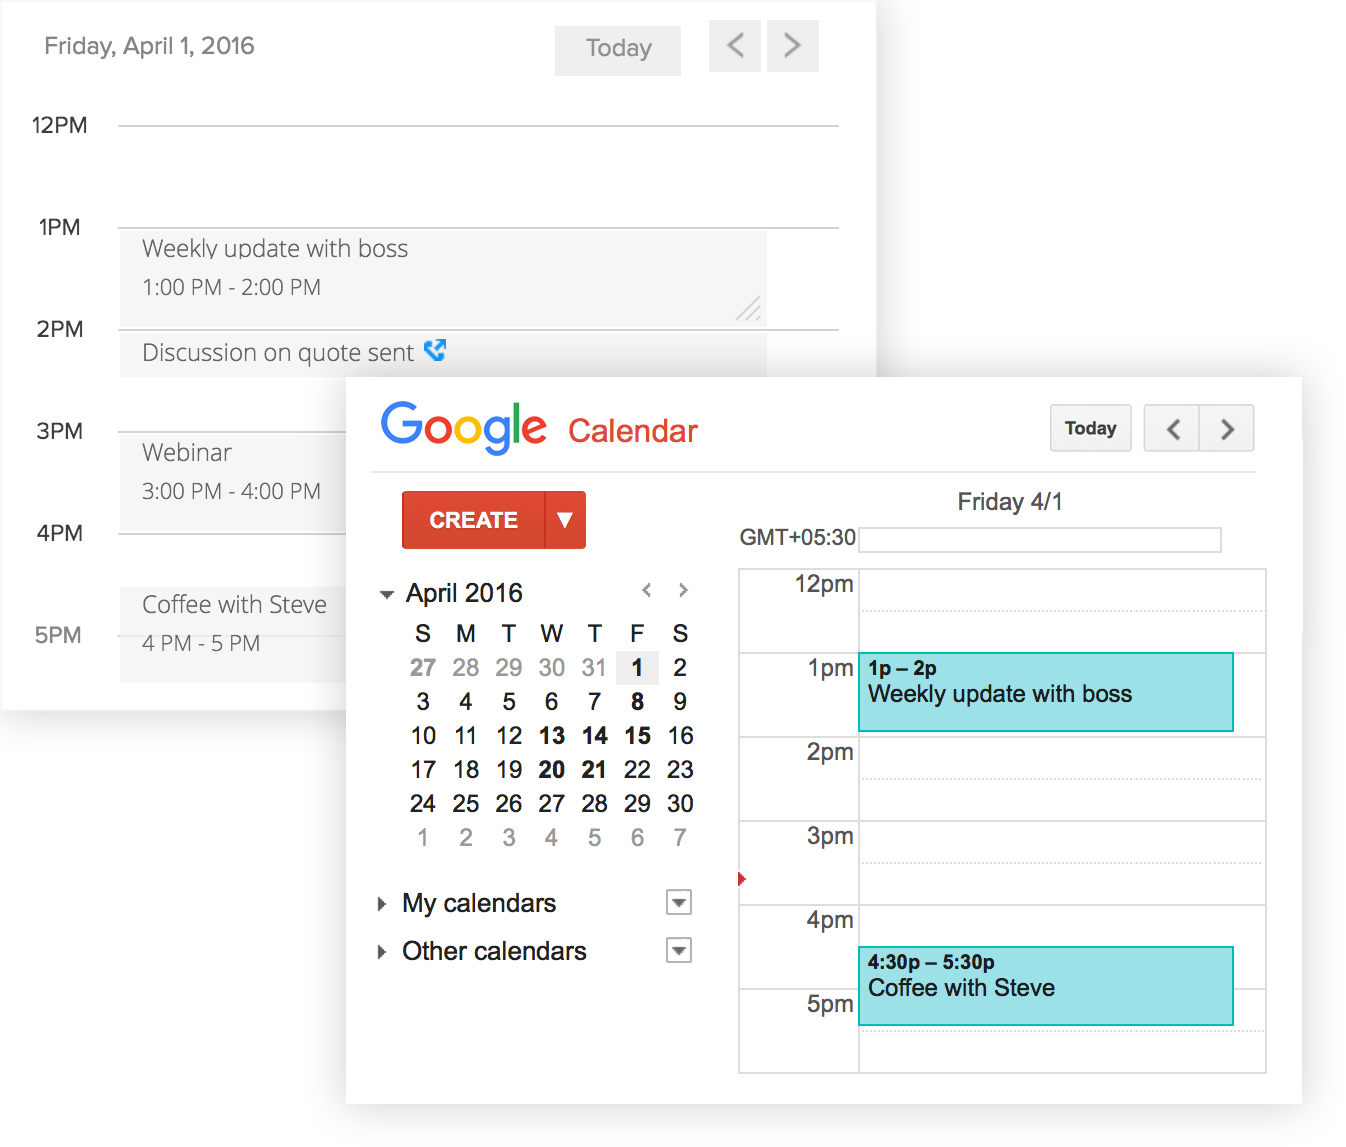 Plan your week and monthly activities within CRM Zoho CRM